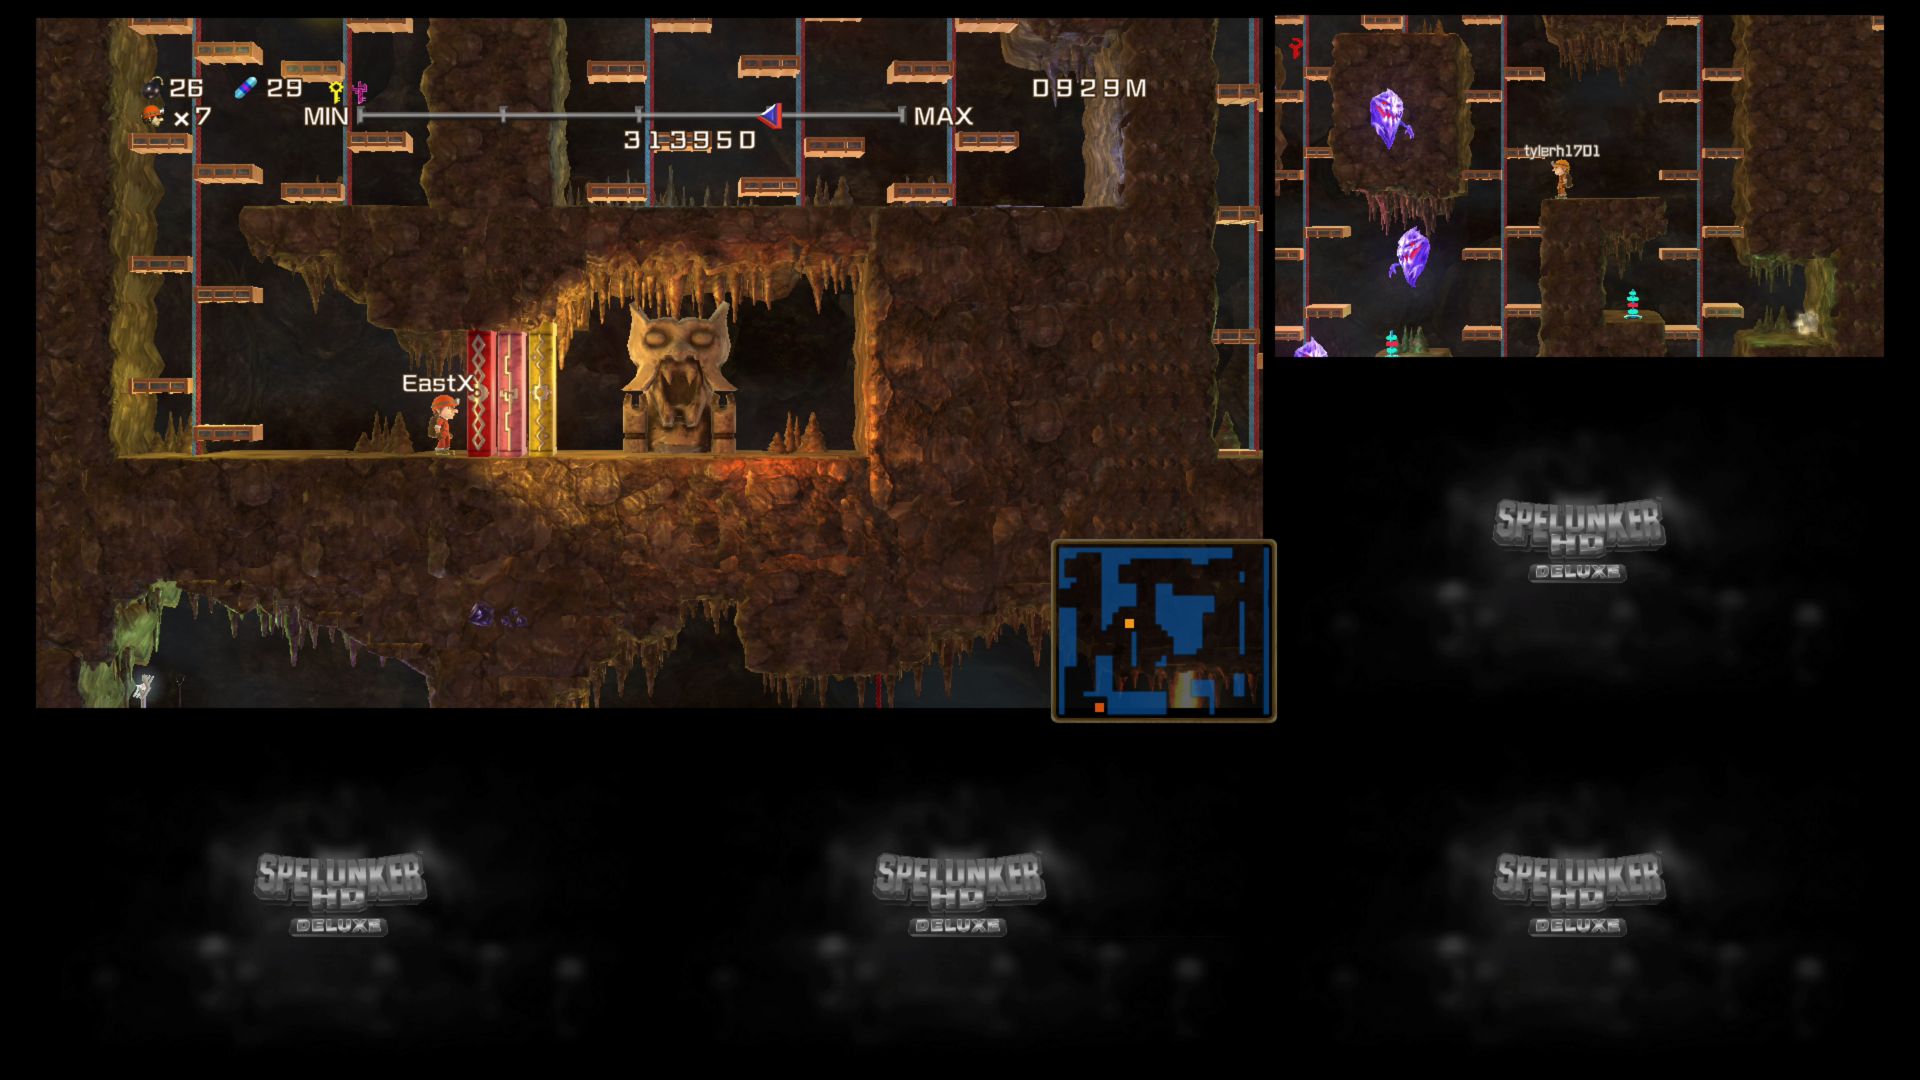 Co-Optimus - Video - New Trailer for Spelunky Features 4 Player Co-Op